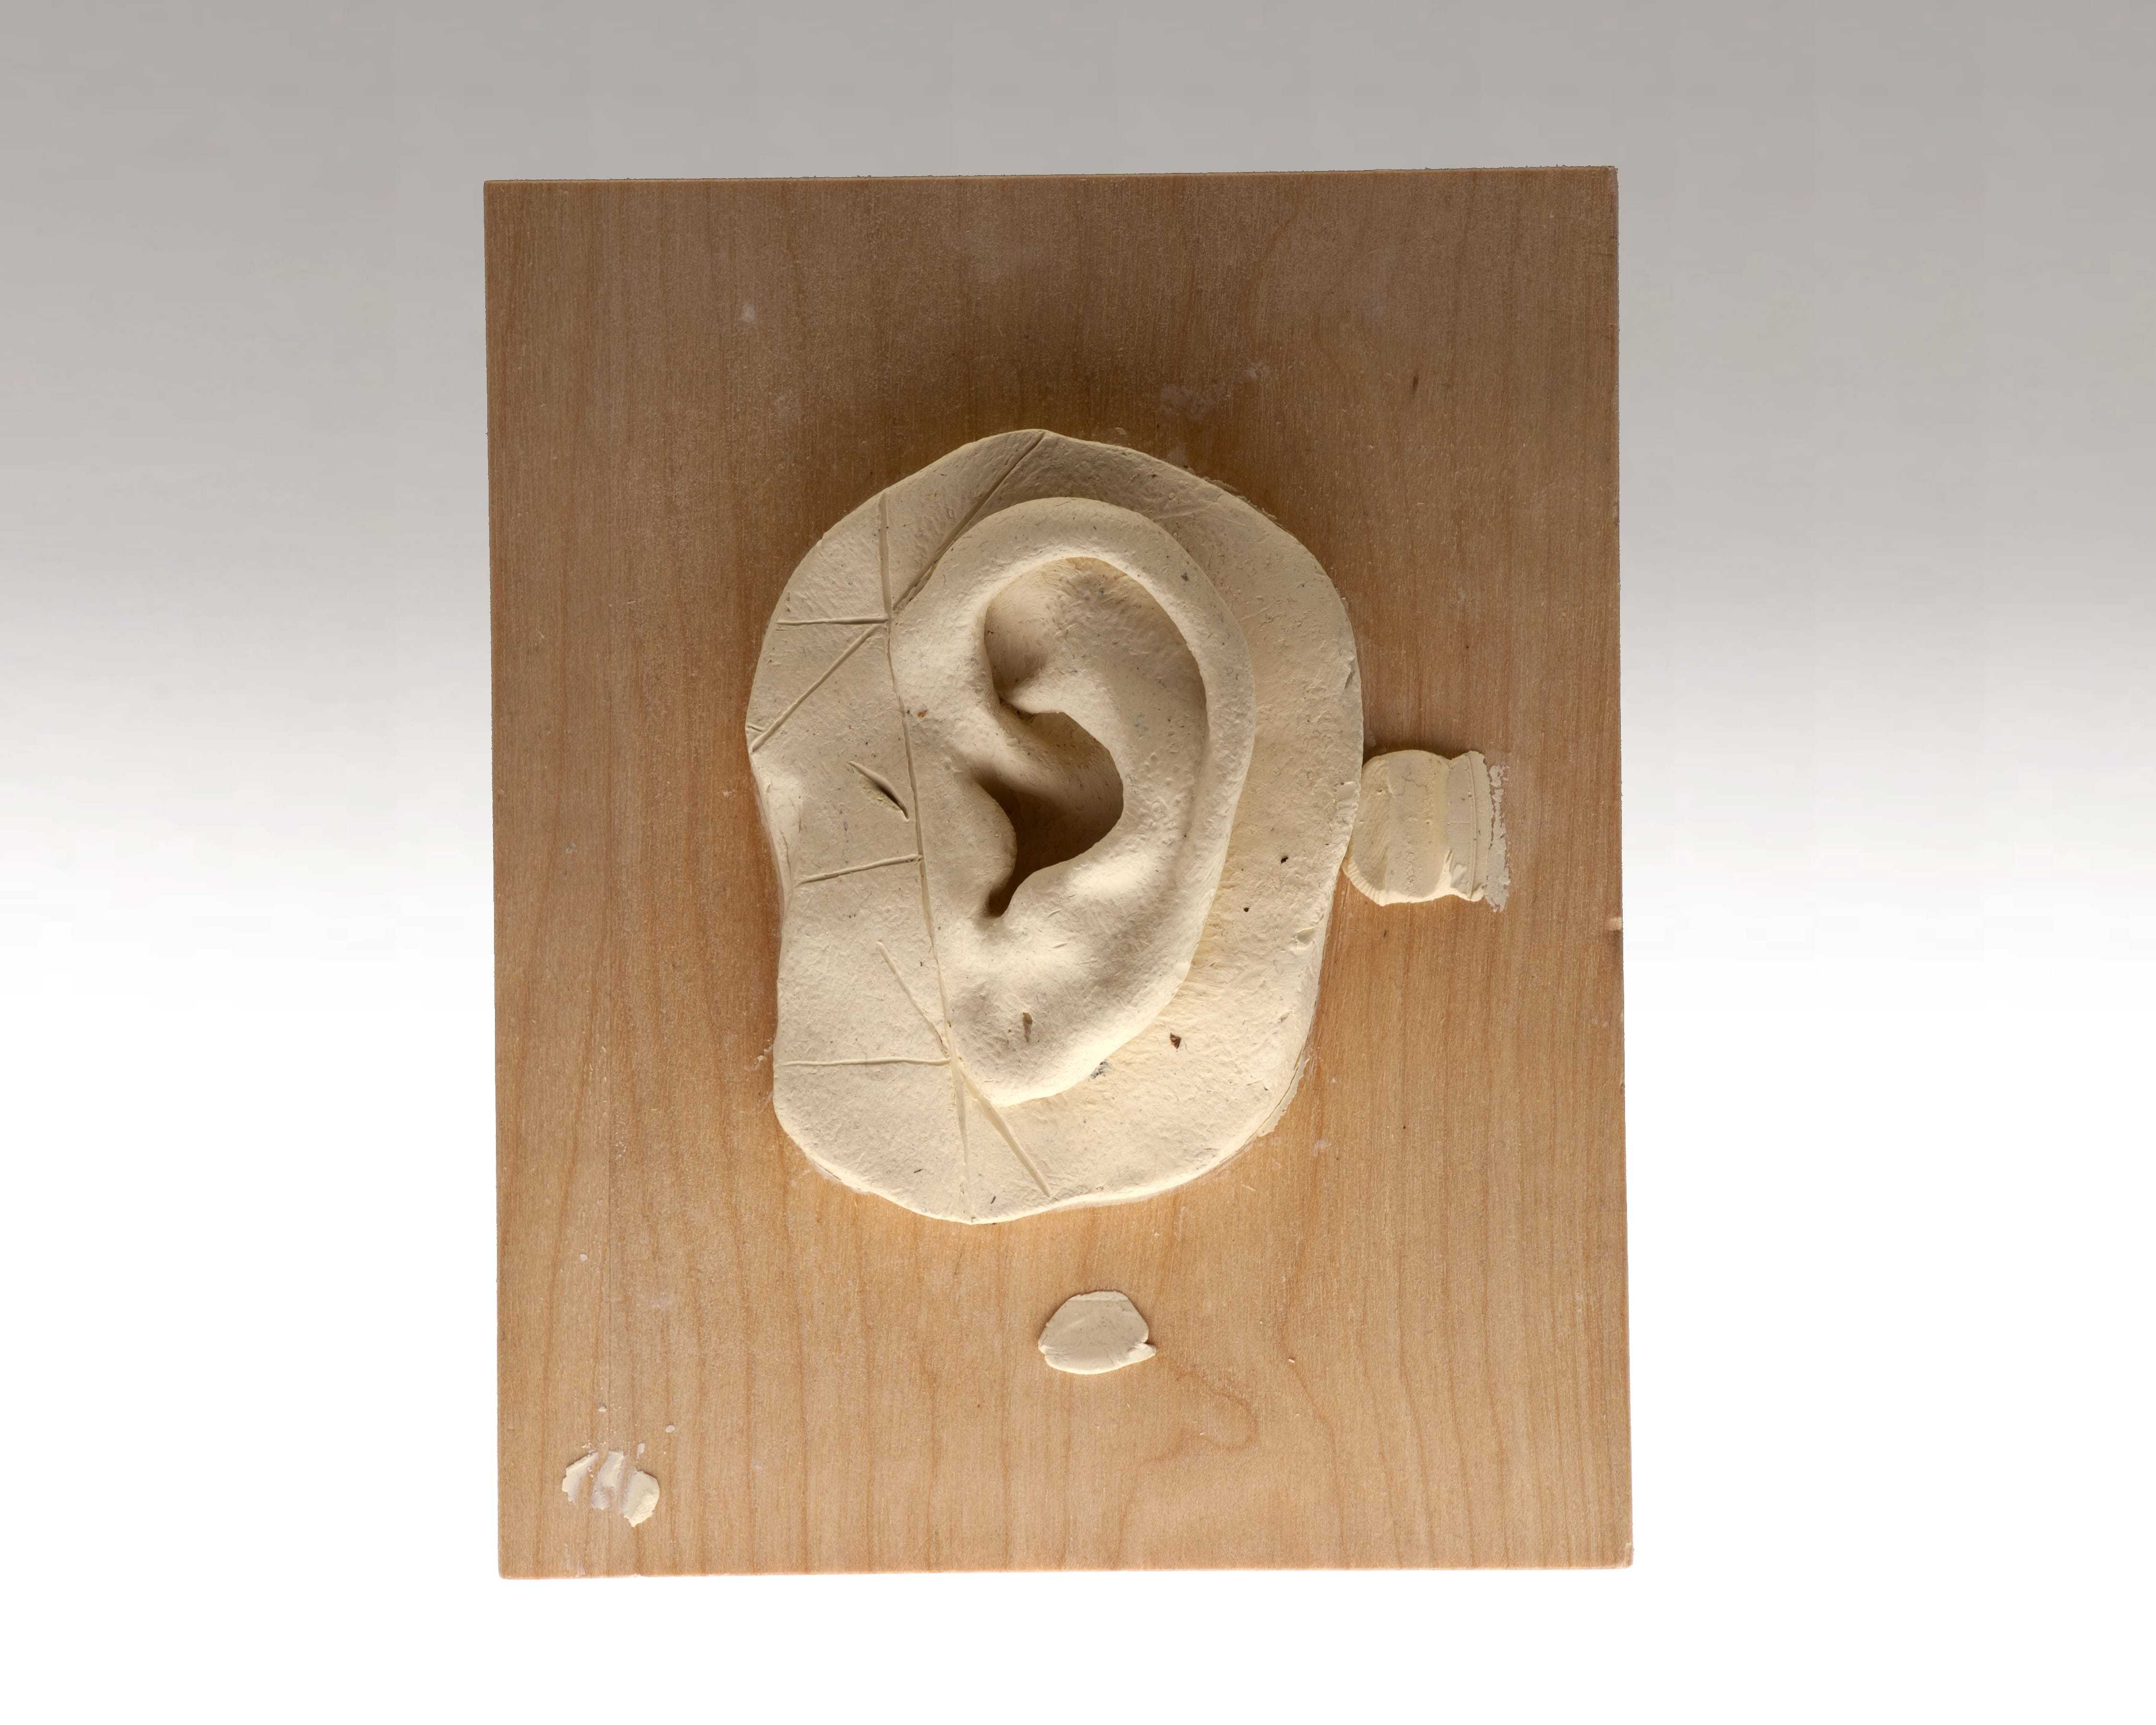 A realistic sculpted human ear made by a disguise specialist applicant